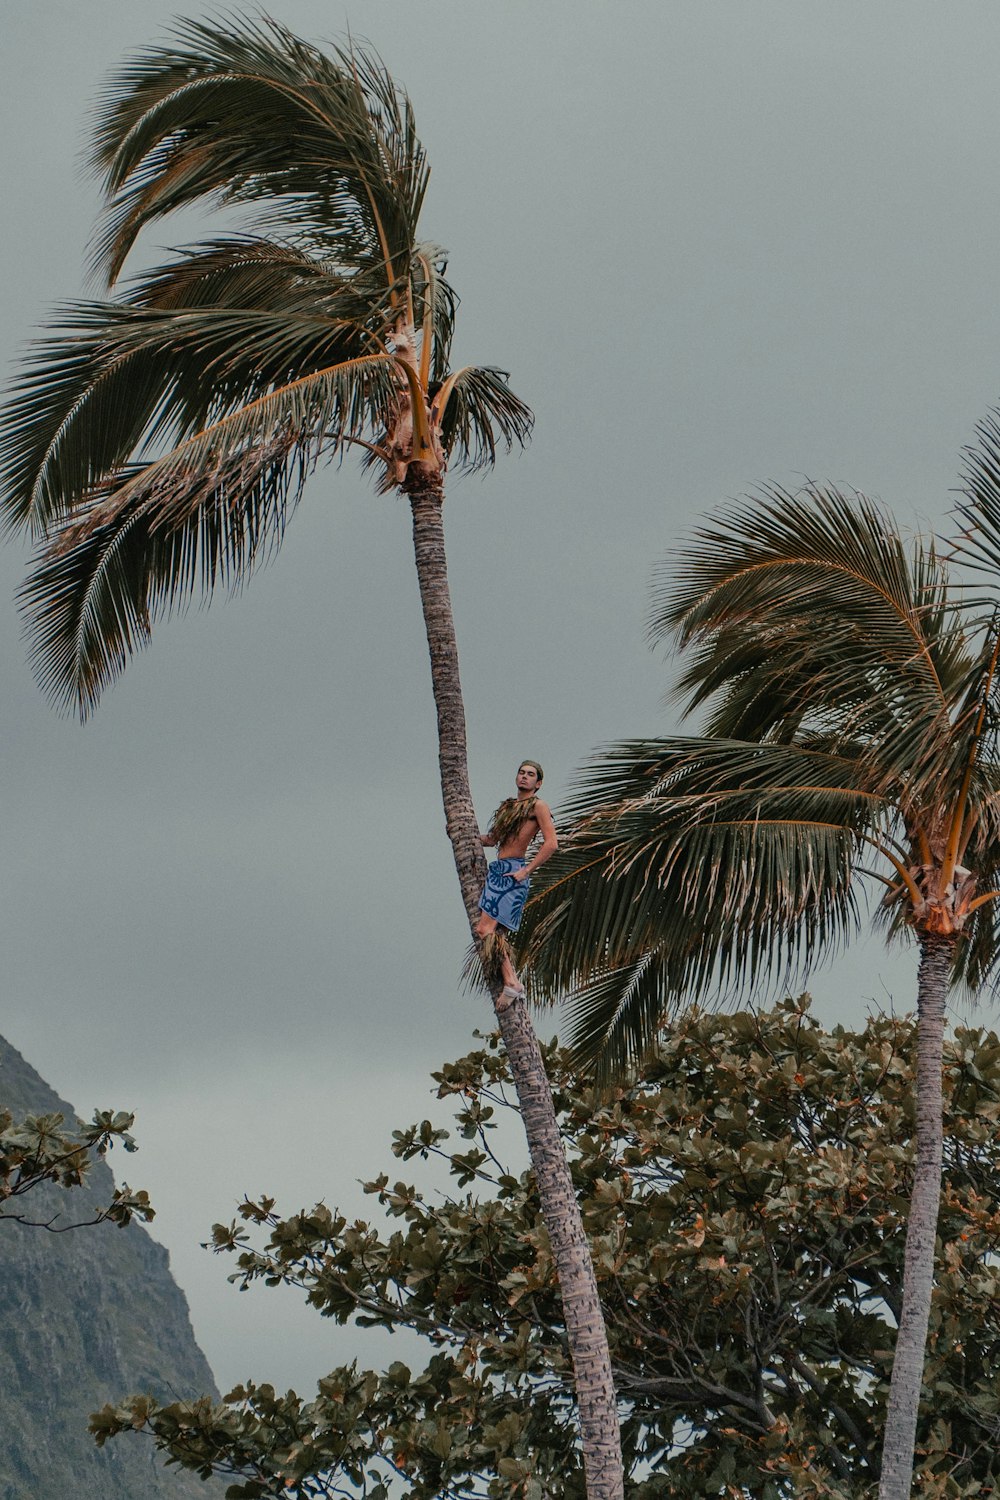 a man climbing up a palm tree on a cloudy day